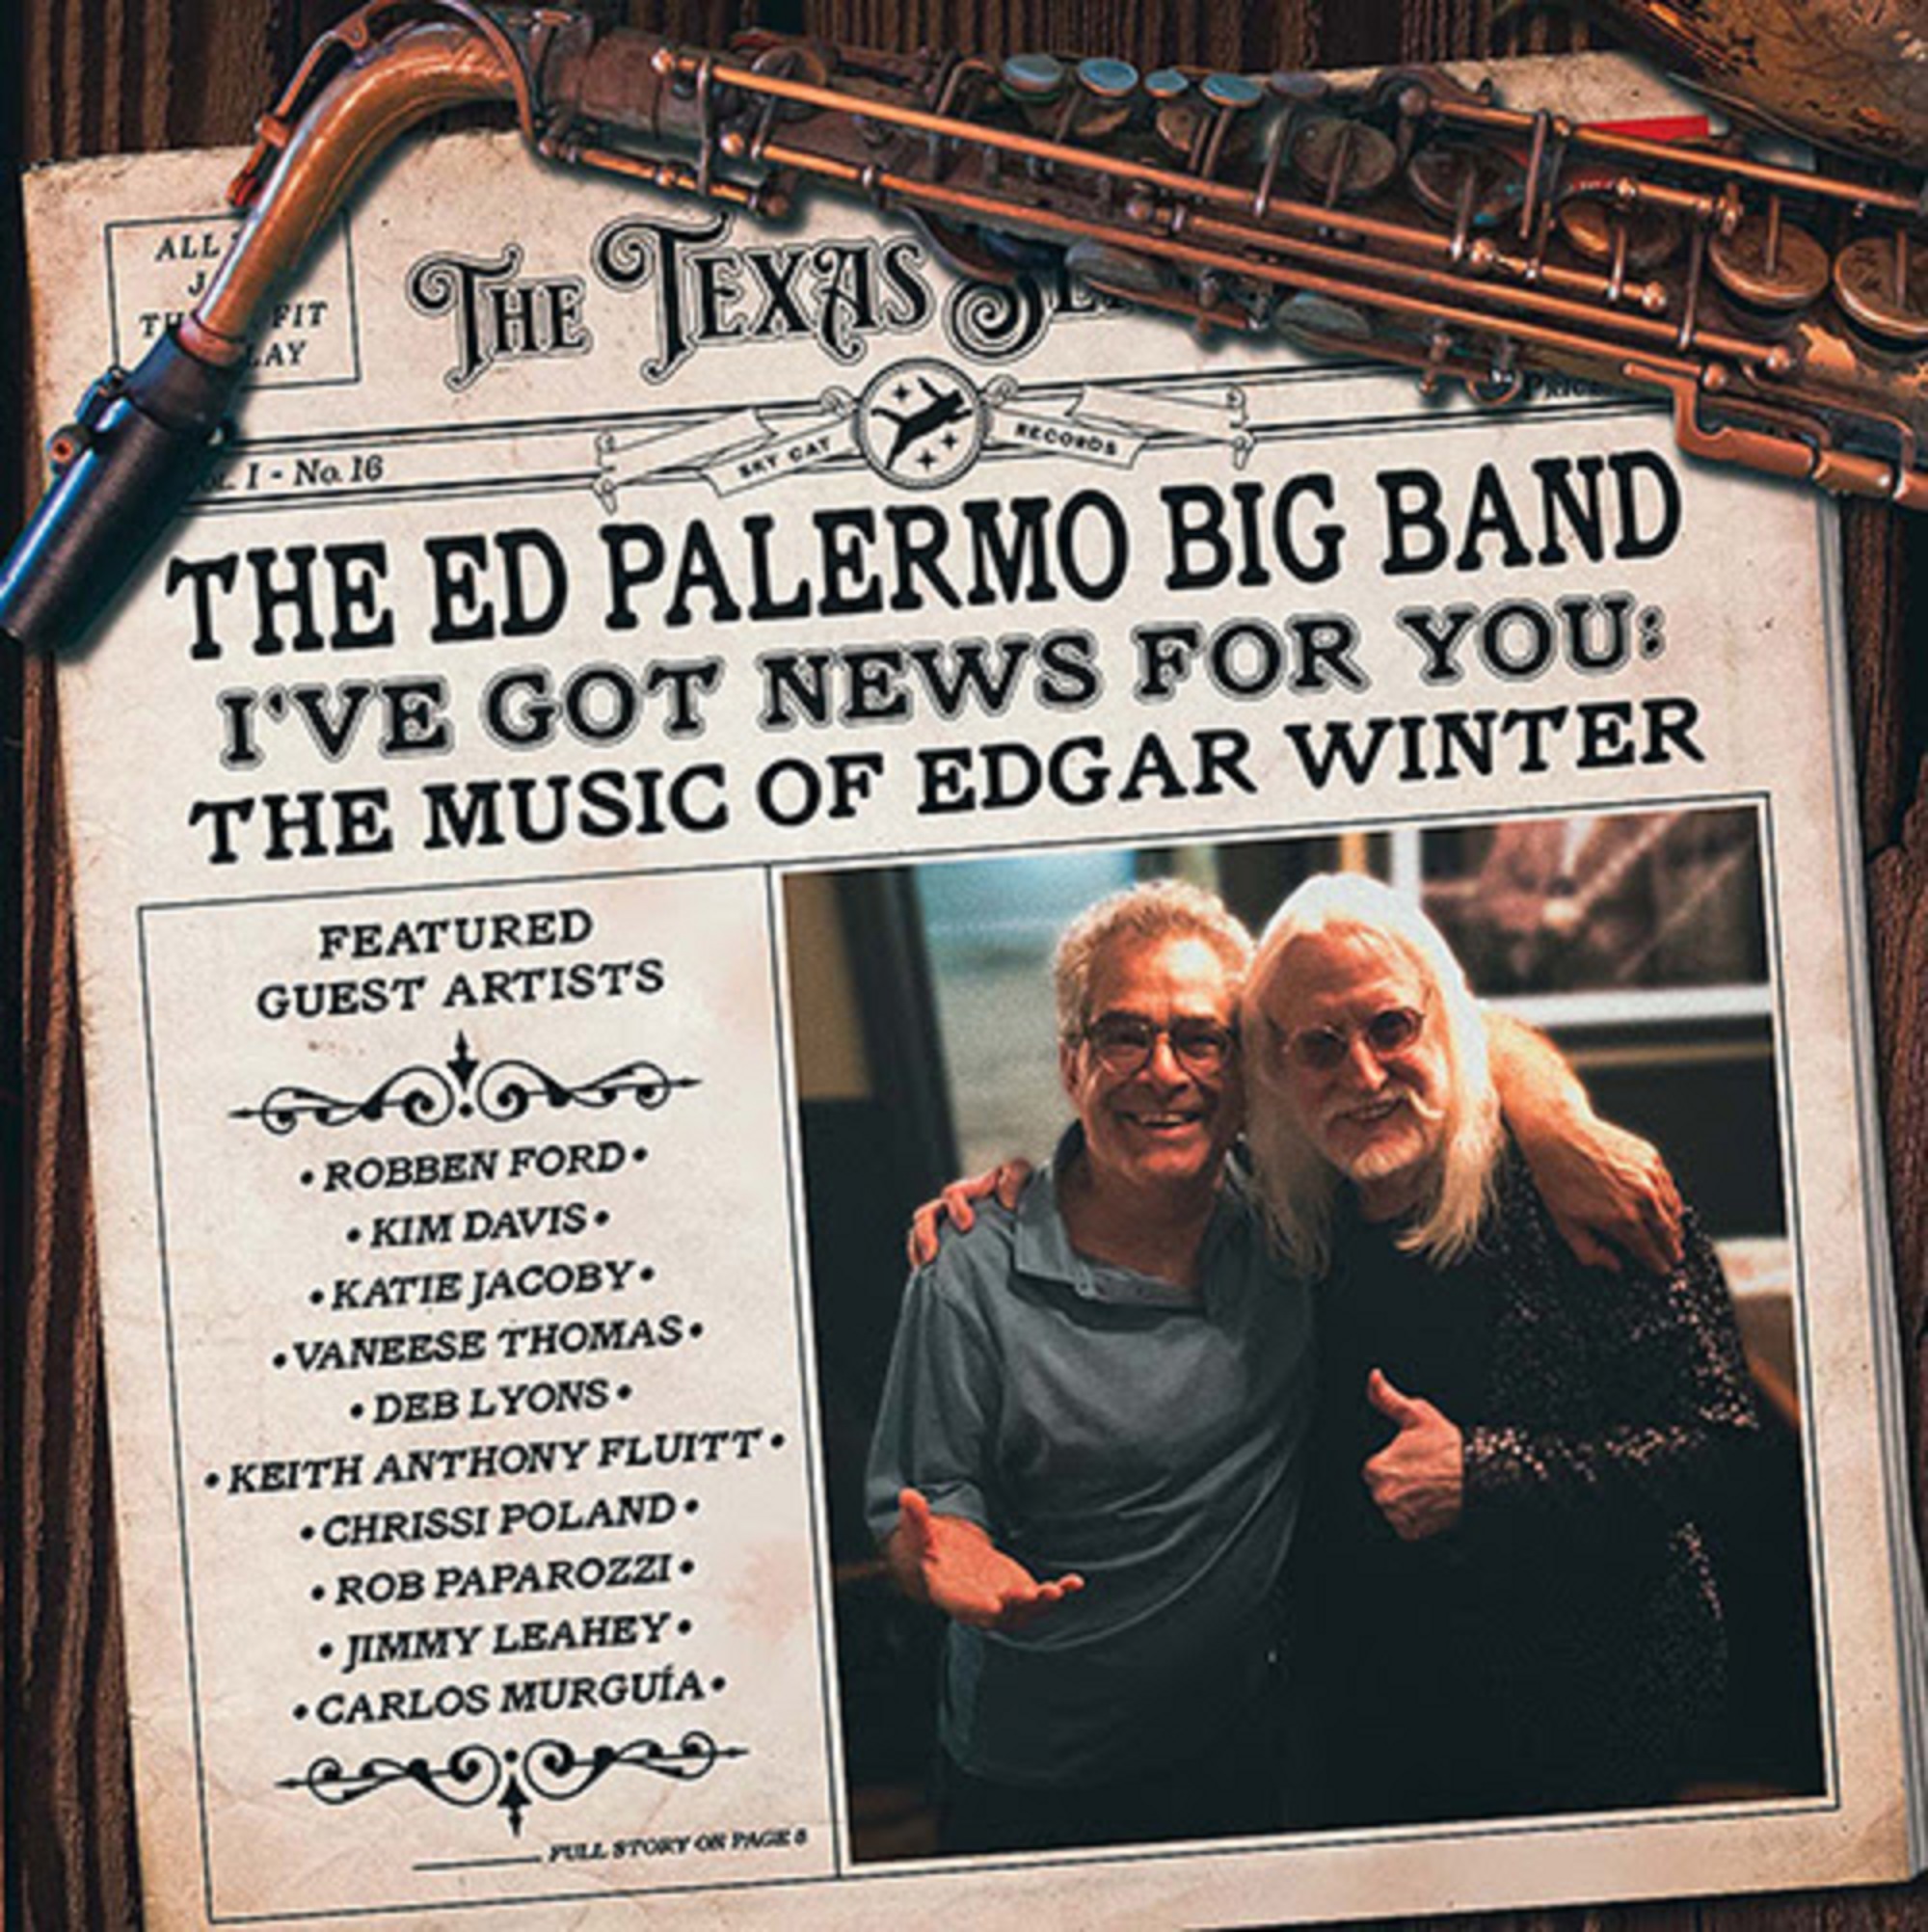 The Ed Palermo Big Band - I’ve Got News For You: The Music of Edgar Winter